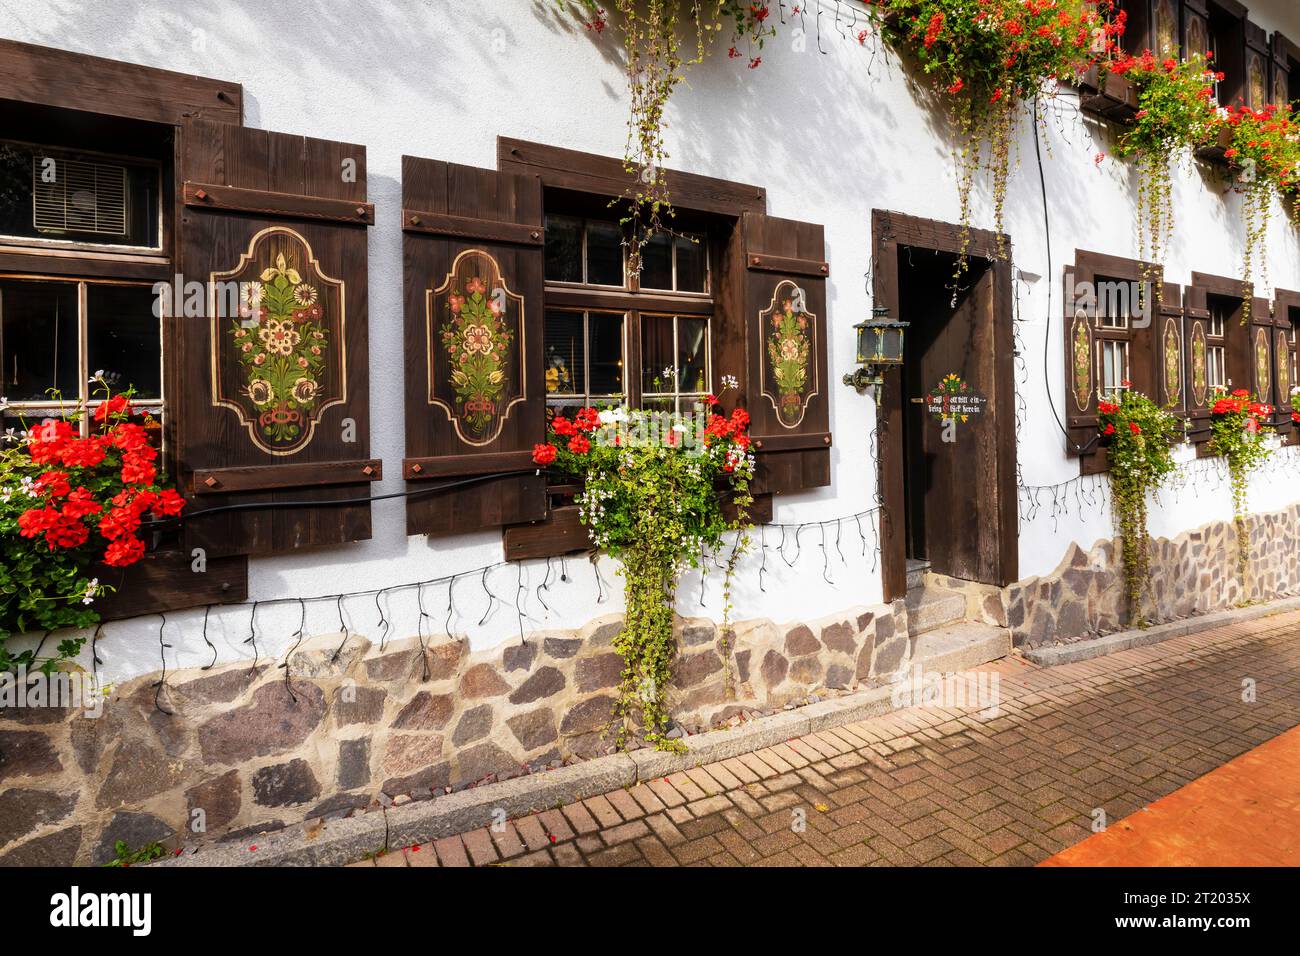 The facade of a traditional building in the Black Forest region with a popular inscription on the door. 'Grüß Gott tritt ein bring Glück herein', whic Stock Photo